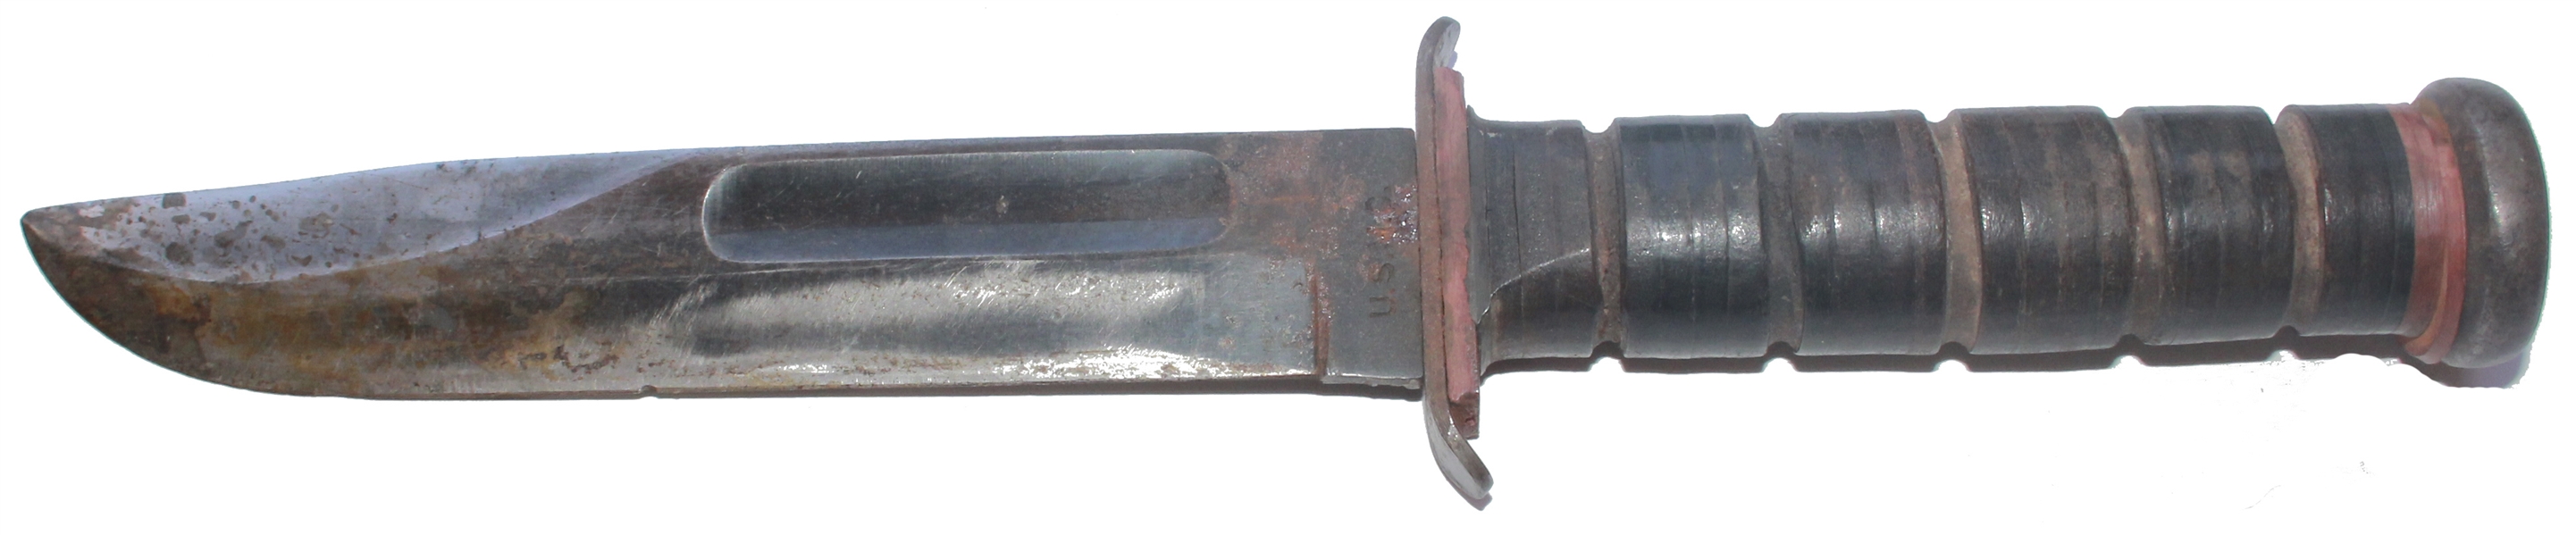 John Bradley's Personally Owned U.S. Marines-Issued Combat Knife -- Likely Used at Iwo Jima -- From John Bradley's Estate